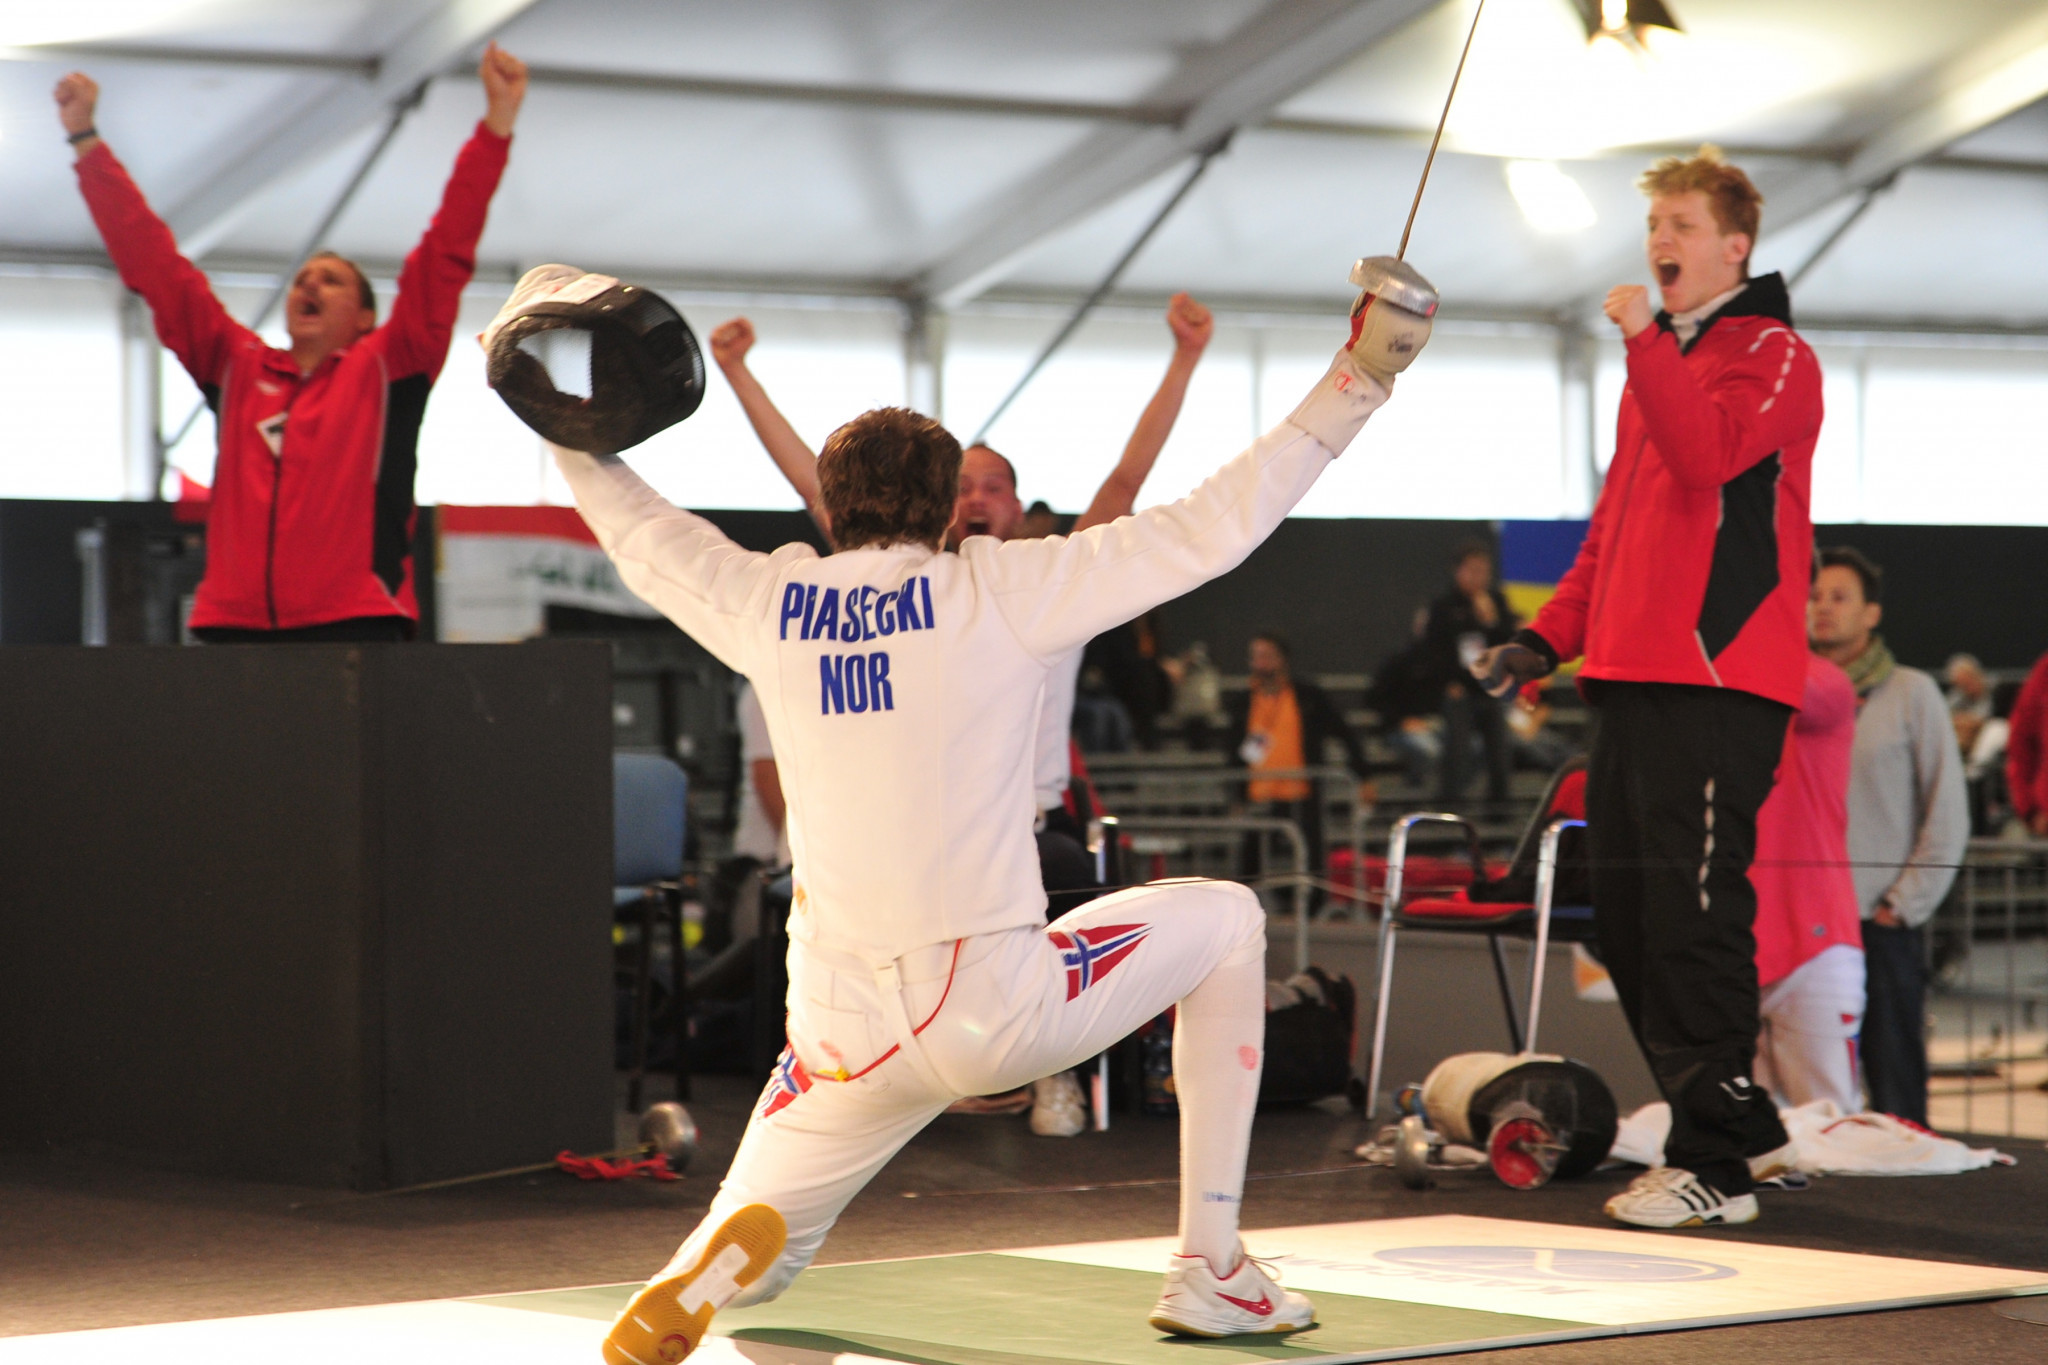 The Norwegian Fencing Federation has also withdrawn the Oslo Cup from the FIE World Cup in response to the global governing body's reinstatement of Russia and Belarus ©Getty Images